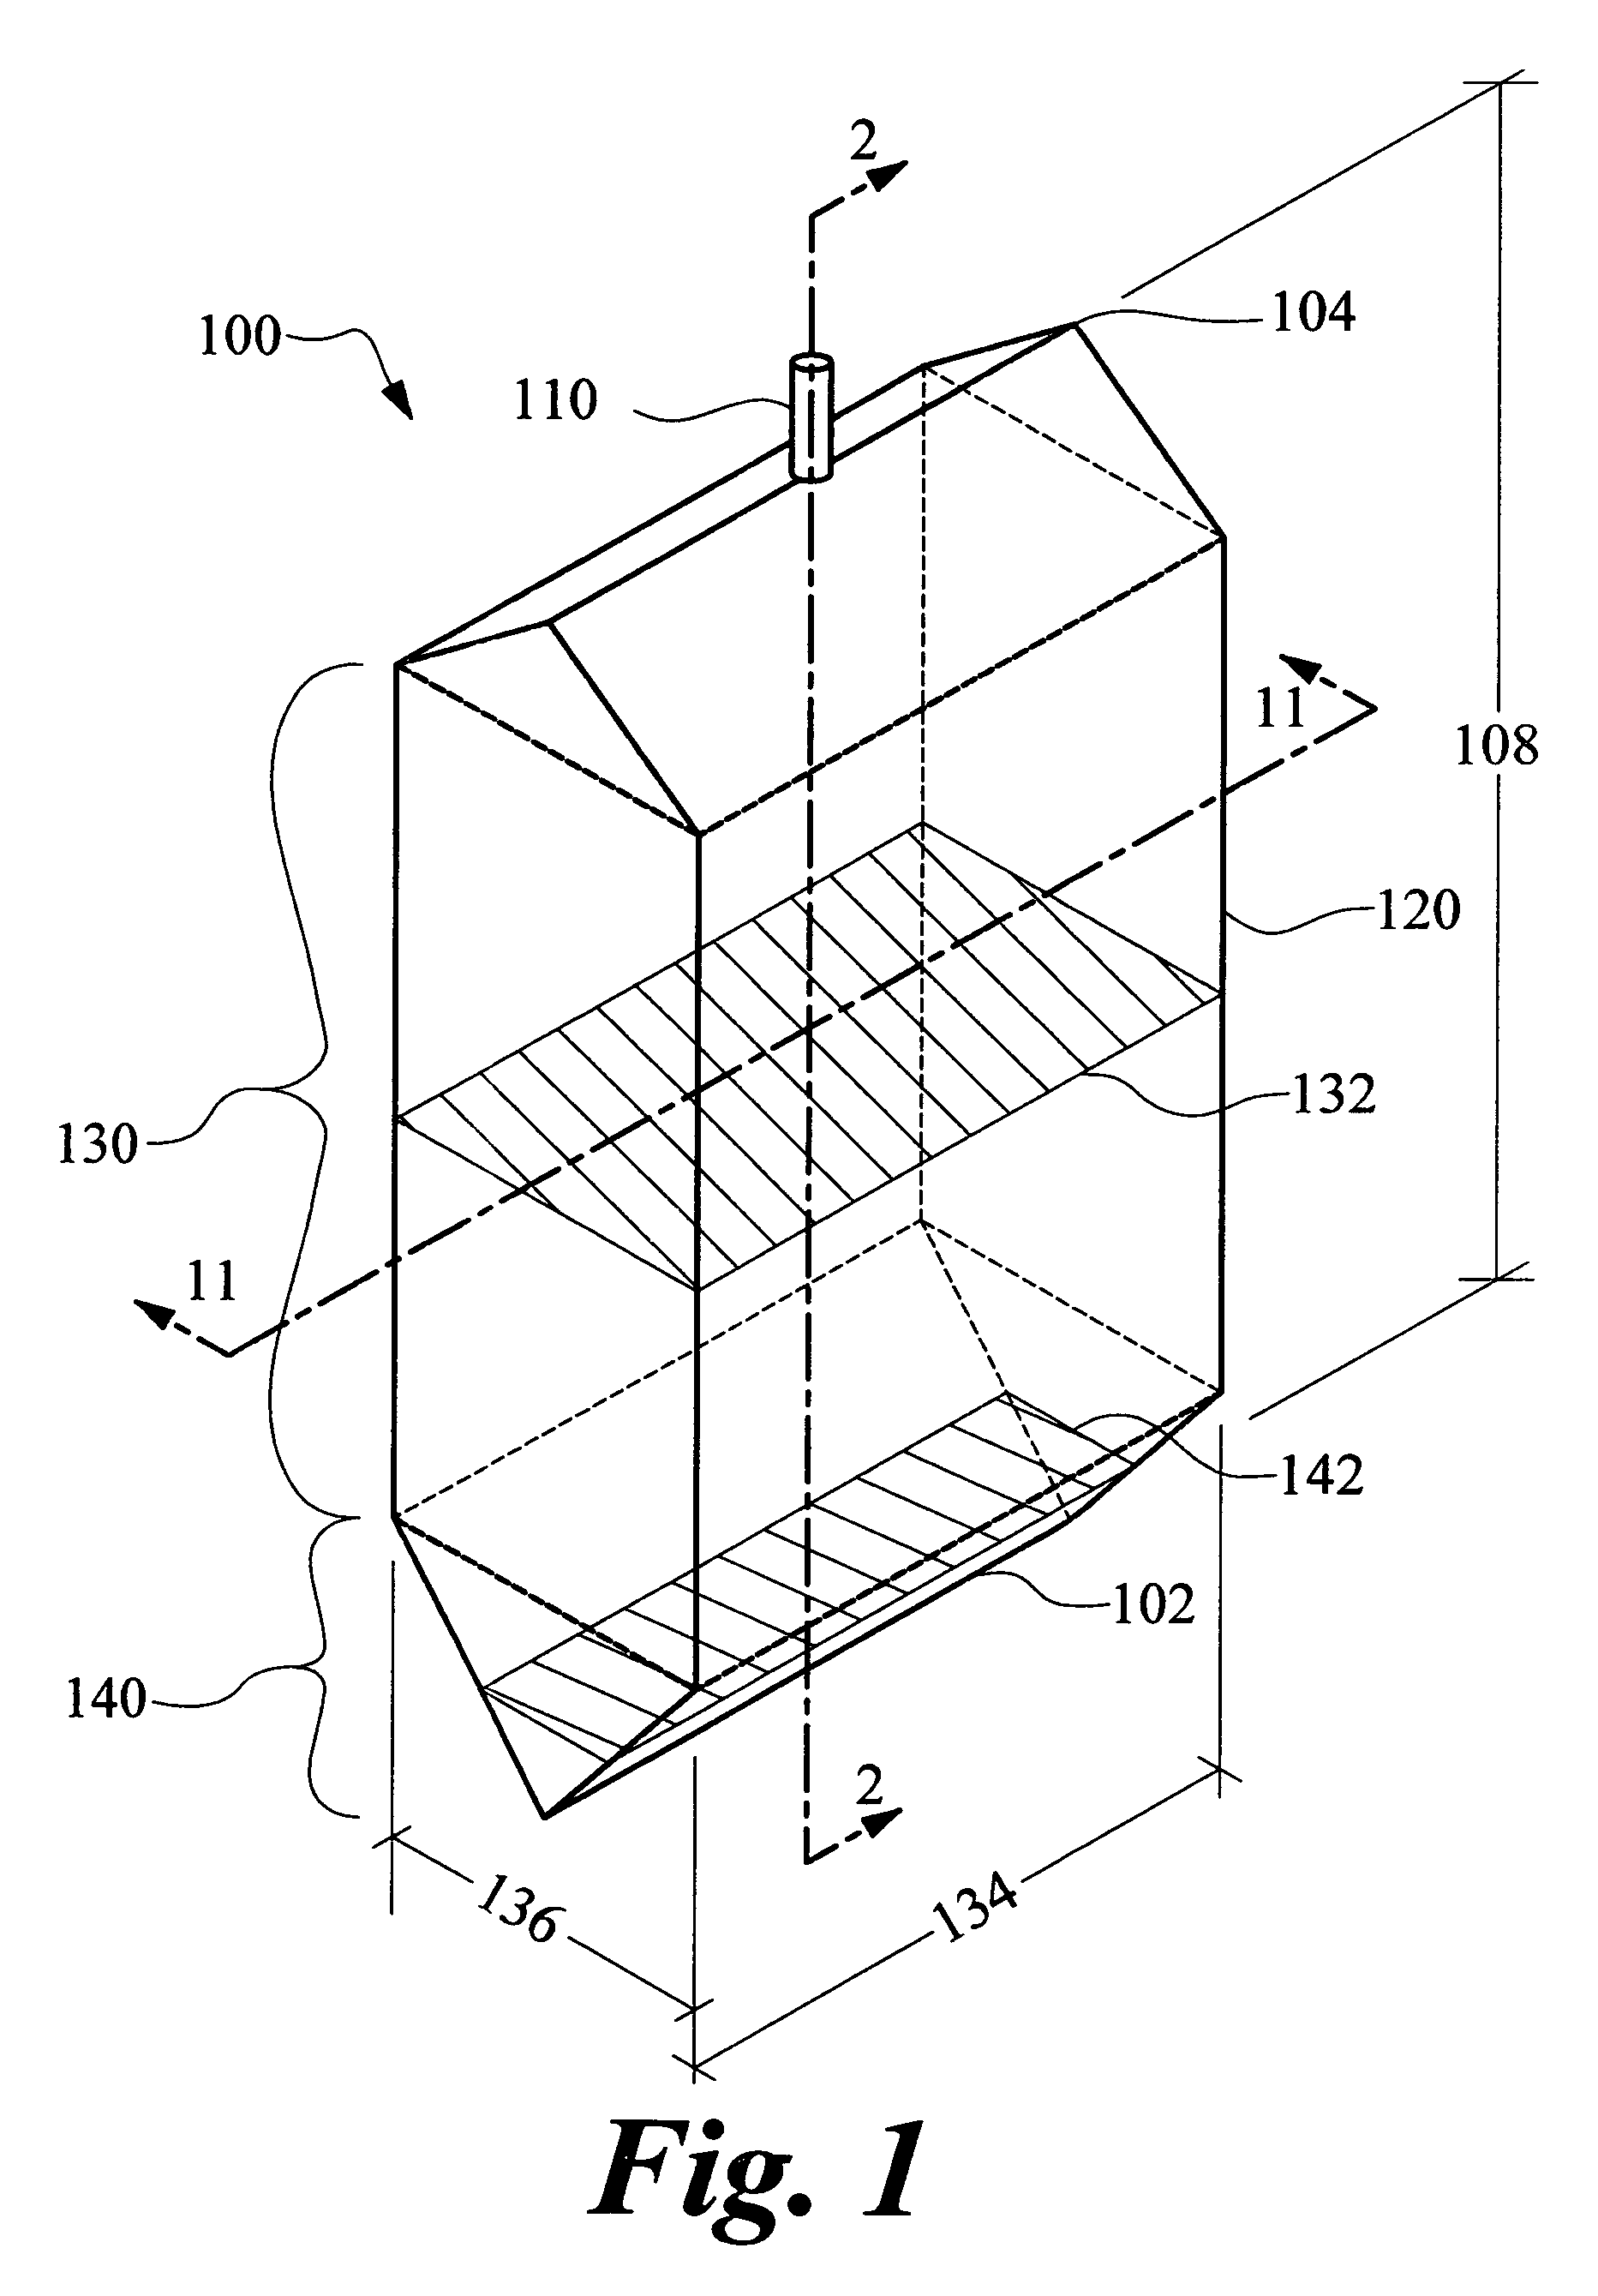 Variable cross-section containment structure liquid measurement device